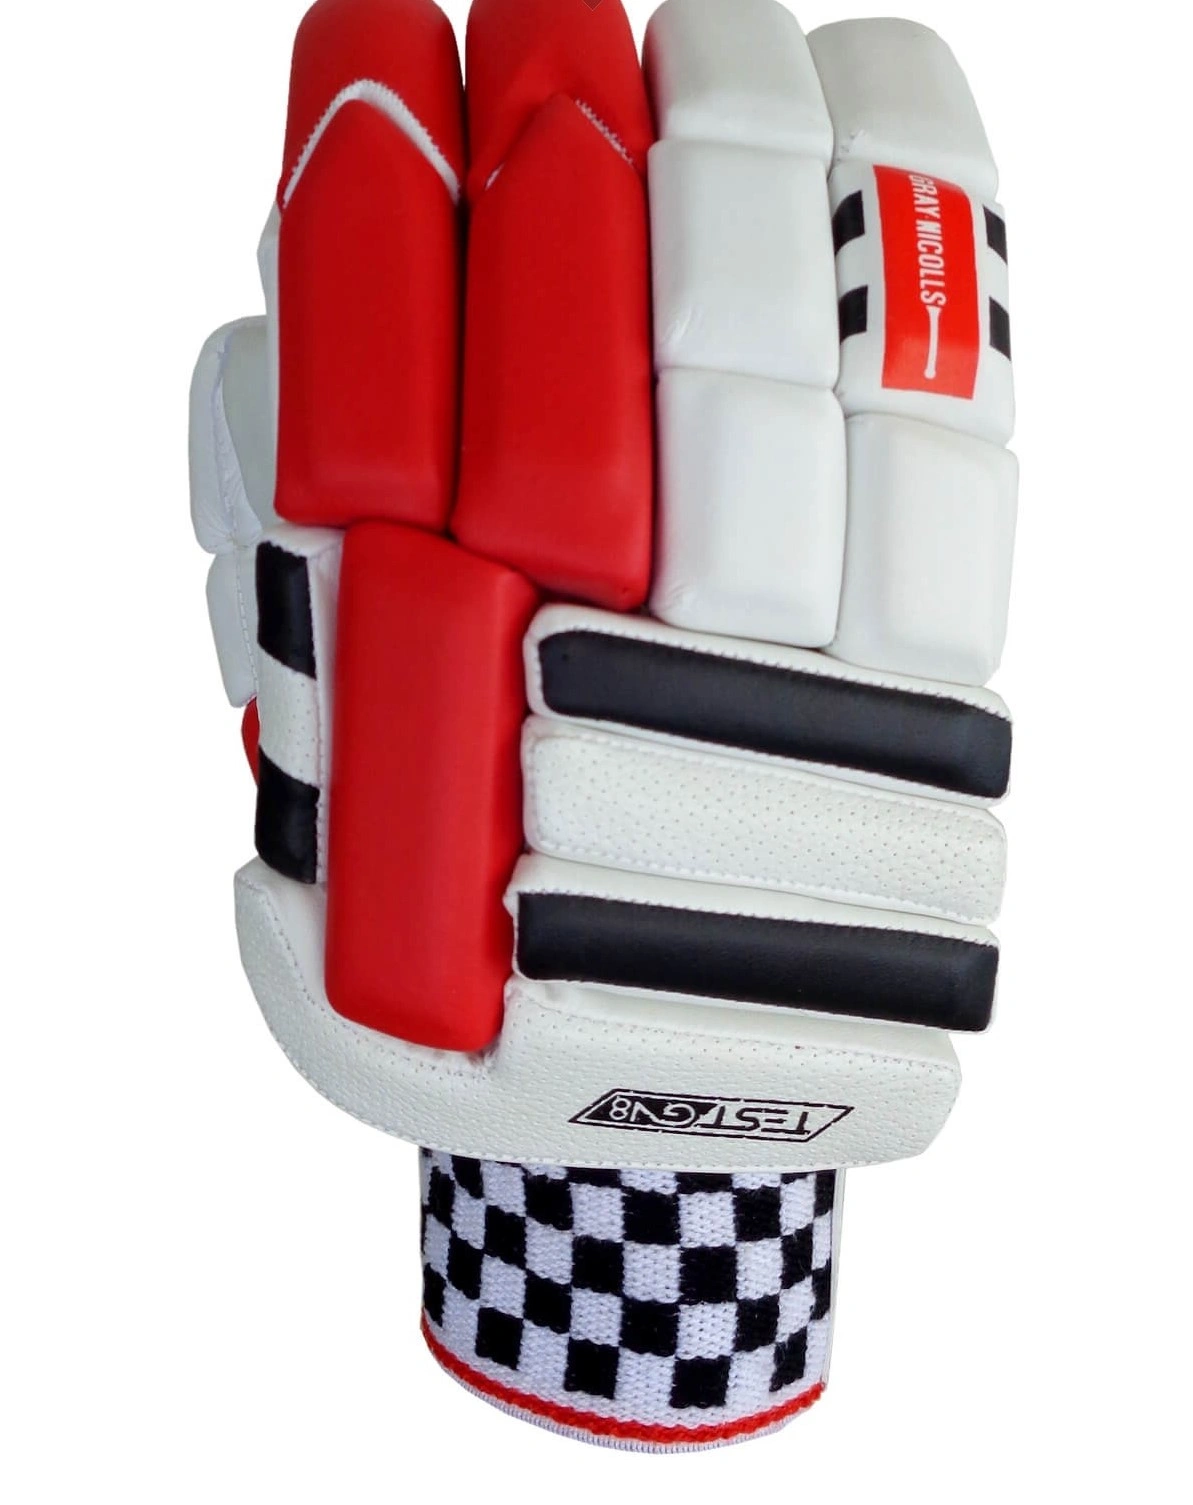 GRAY-NICOLLS GN7 PRO NITRO BATTING GLOVES MENS: Premium Leather Batting Gloves with X-LITE Foam and Gel Zone Technology for Maximum Comfort and Protection-MENS LH-1